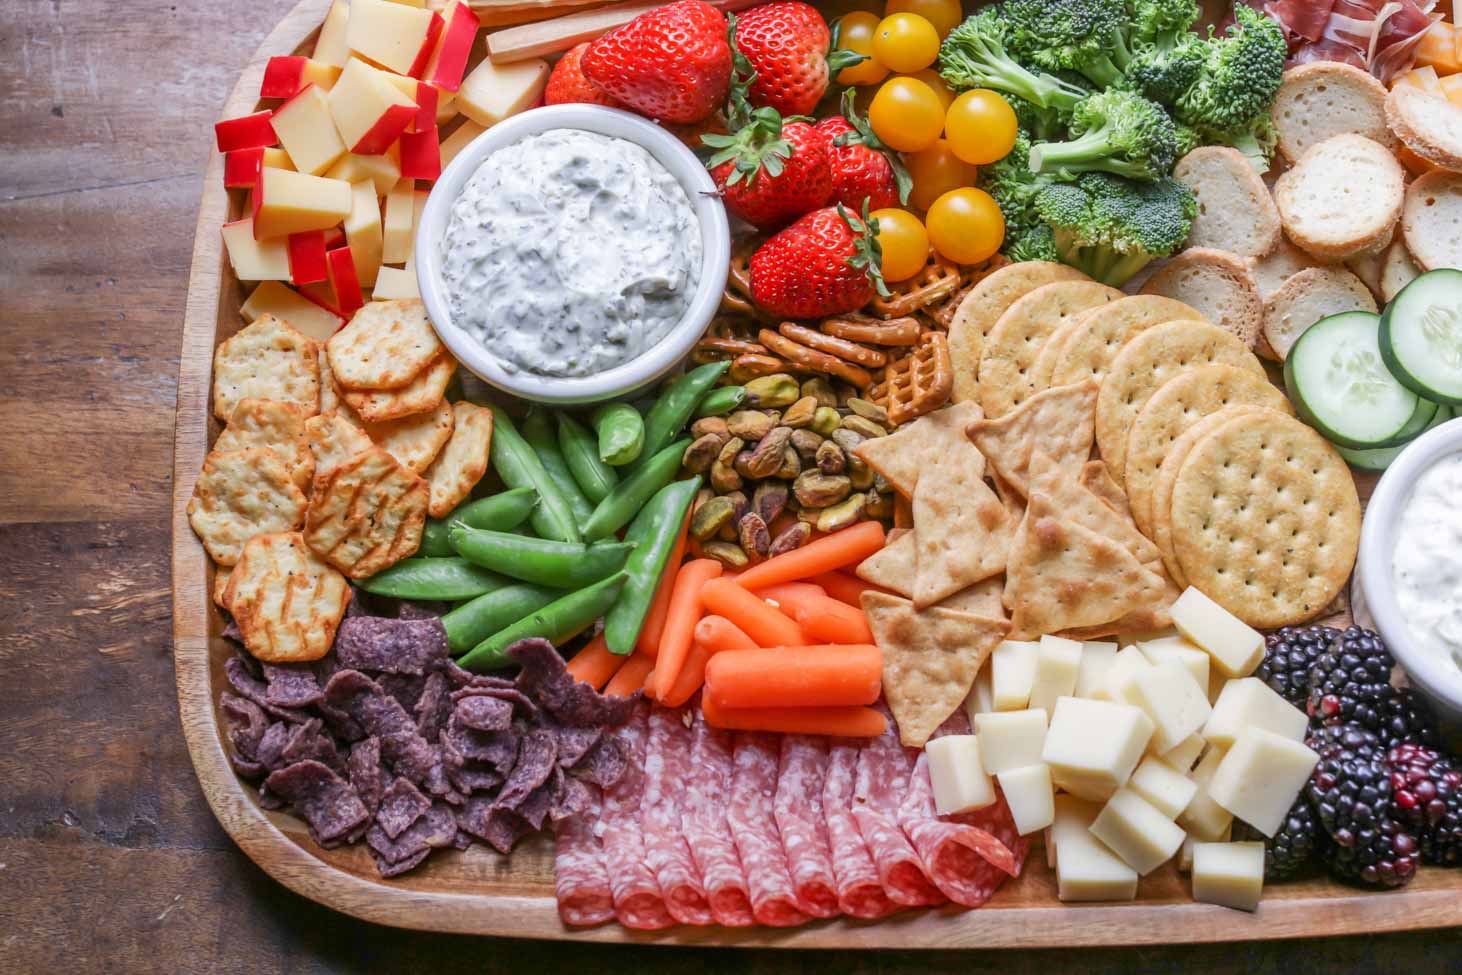 Halloween dinner ideas - a charcuterie board spread served on a wooden tray.